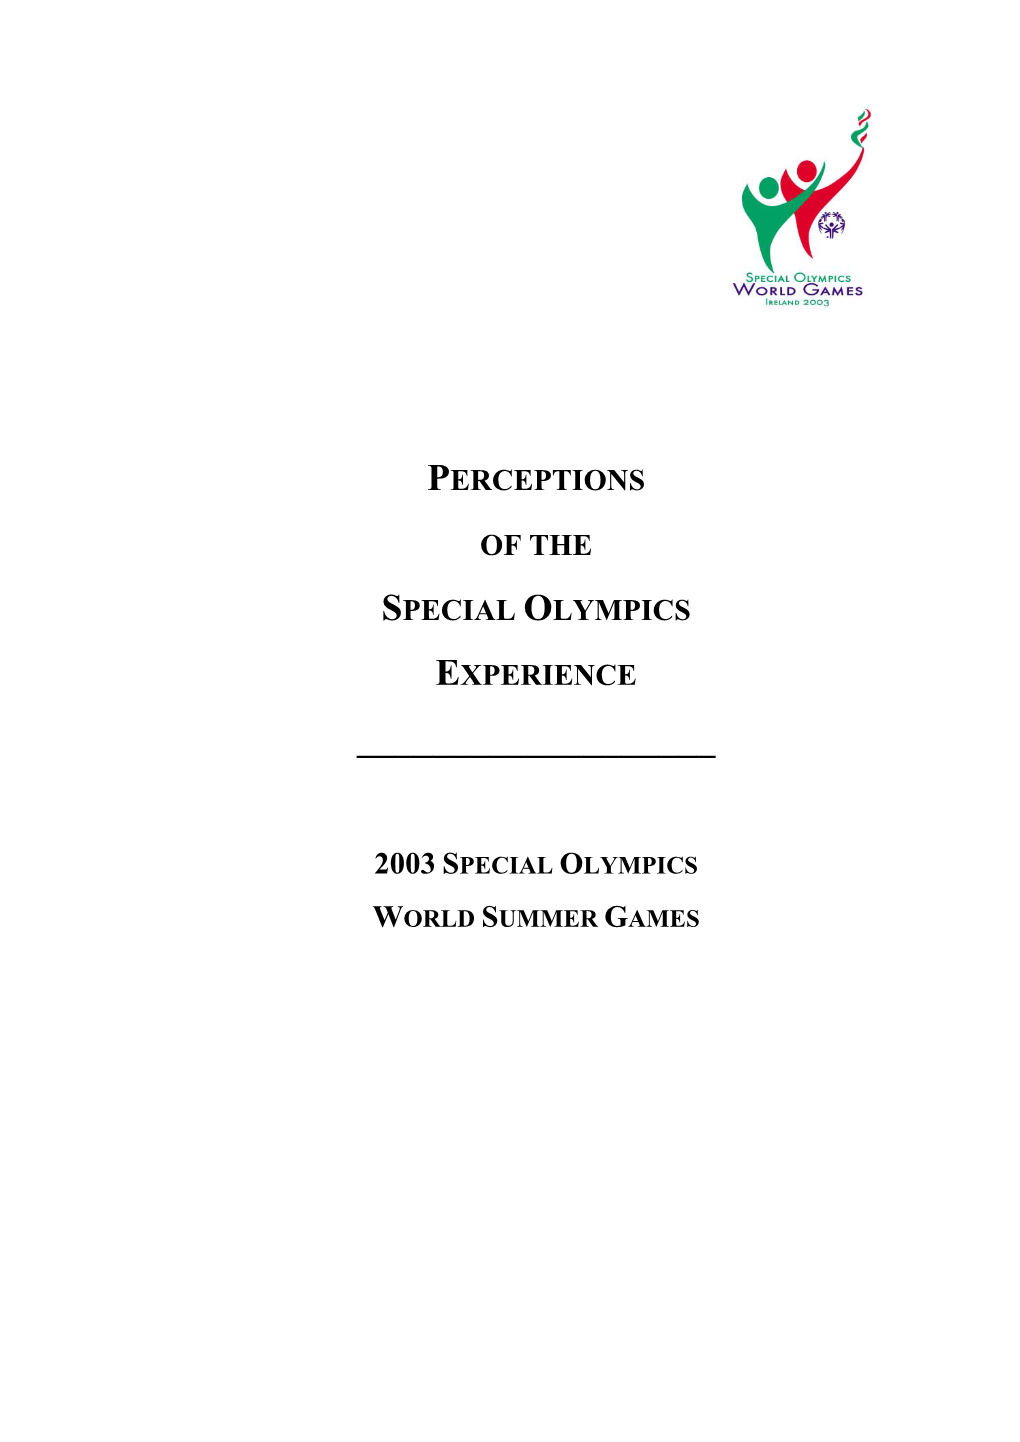 Perceptions of the Special Olympics Experience